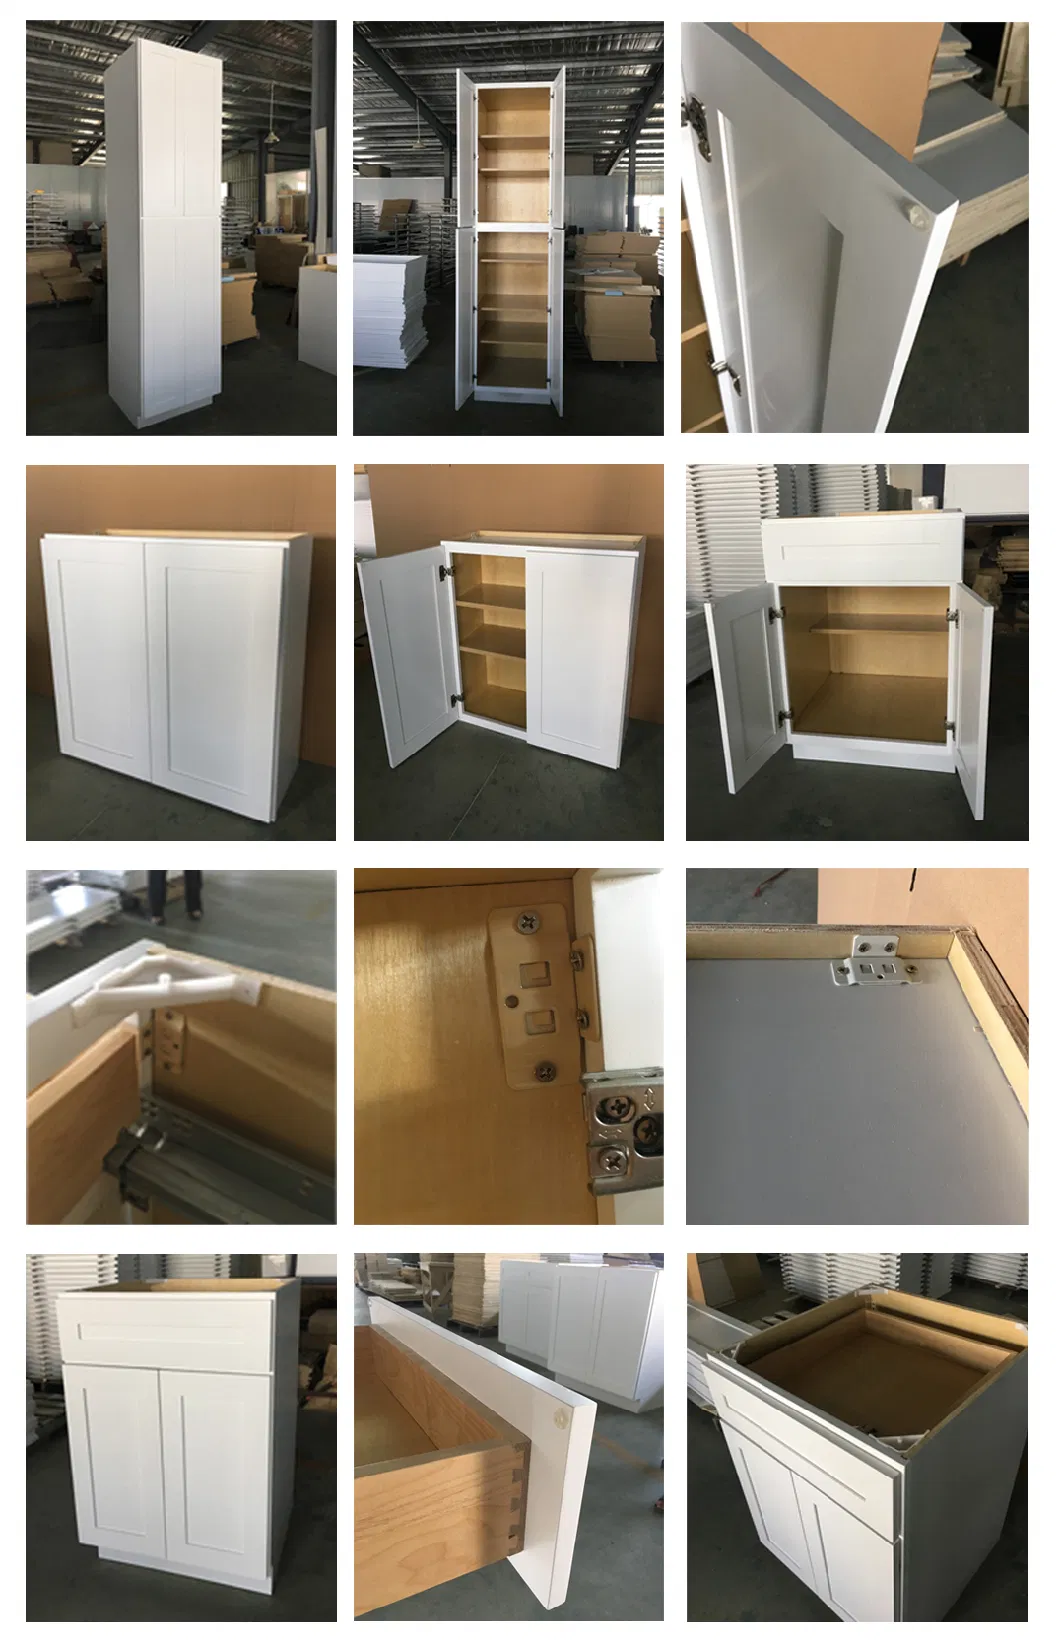 Factory Price Plywood Fixed Products Bedroom Wardrobe Cupboard Kitchen Furniture Manufacturer